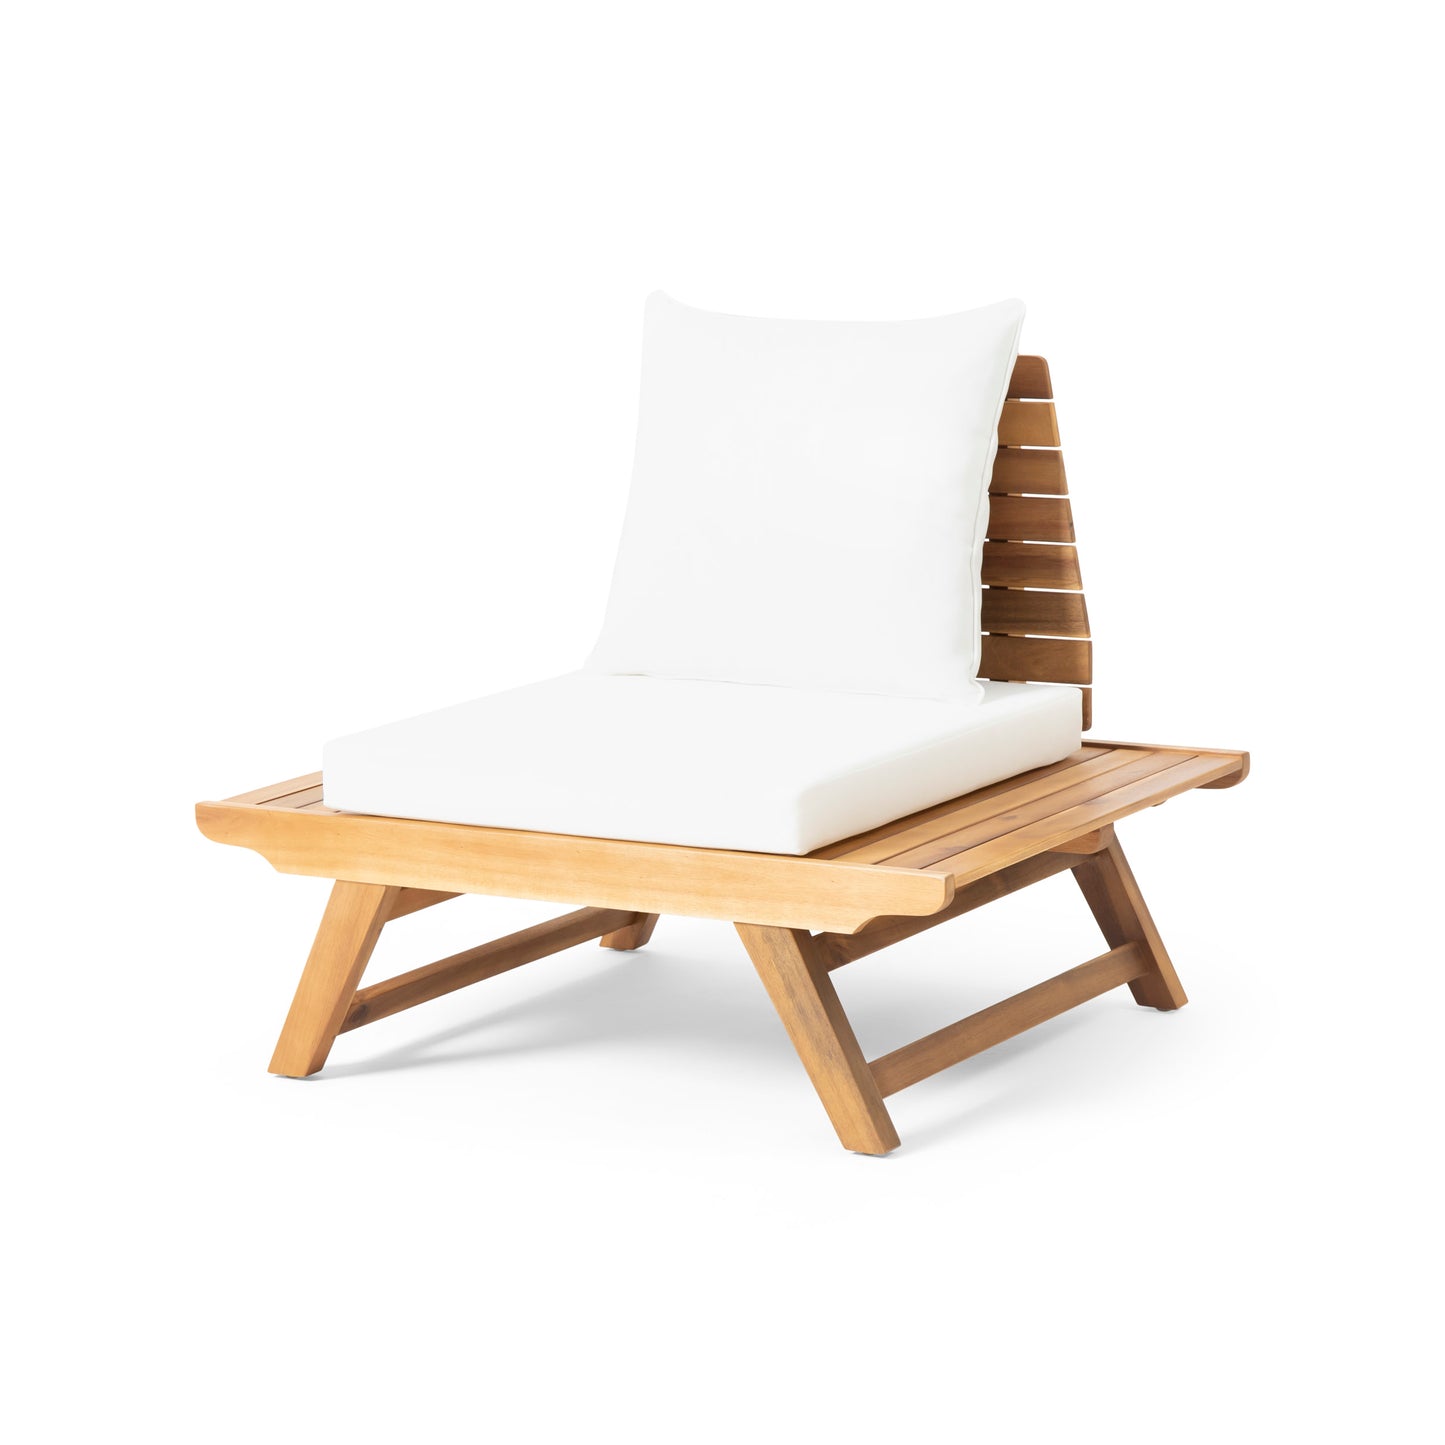 Bowie Outdoor Acacia Wood Club Chairs with Cushions